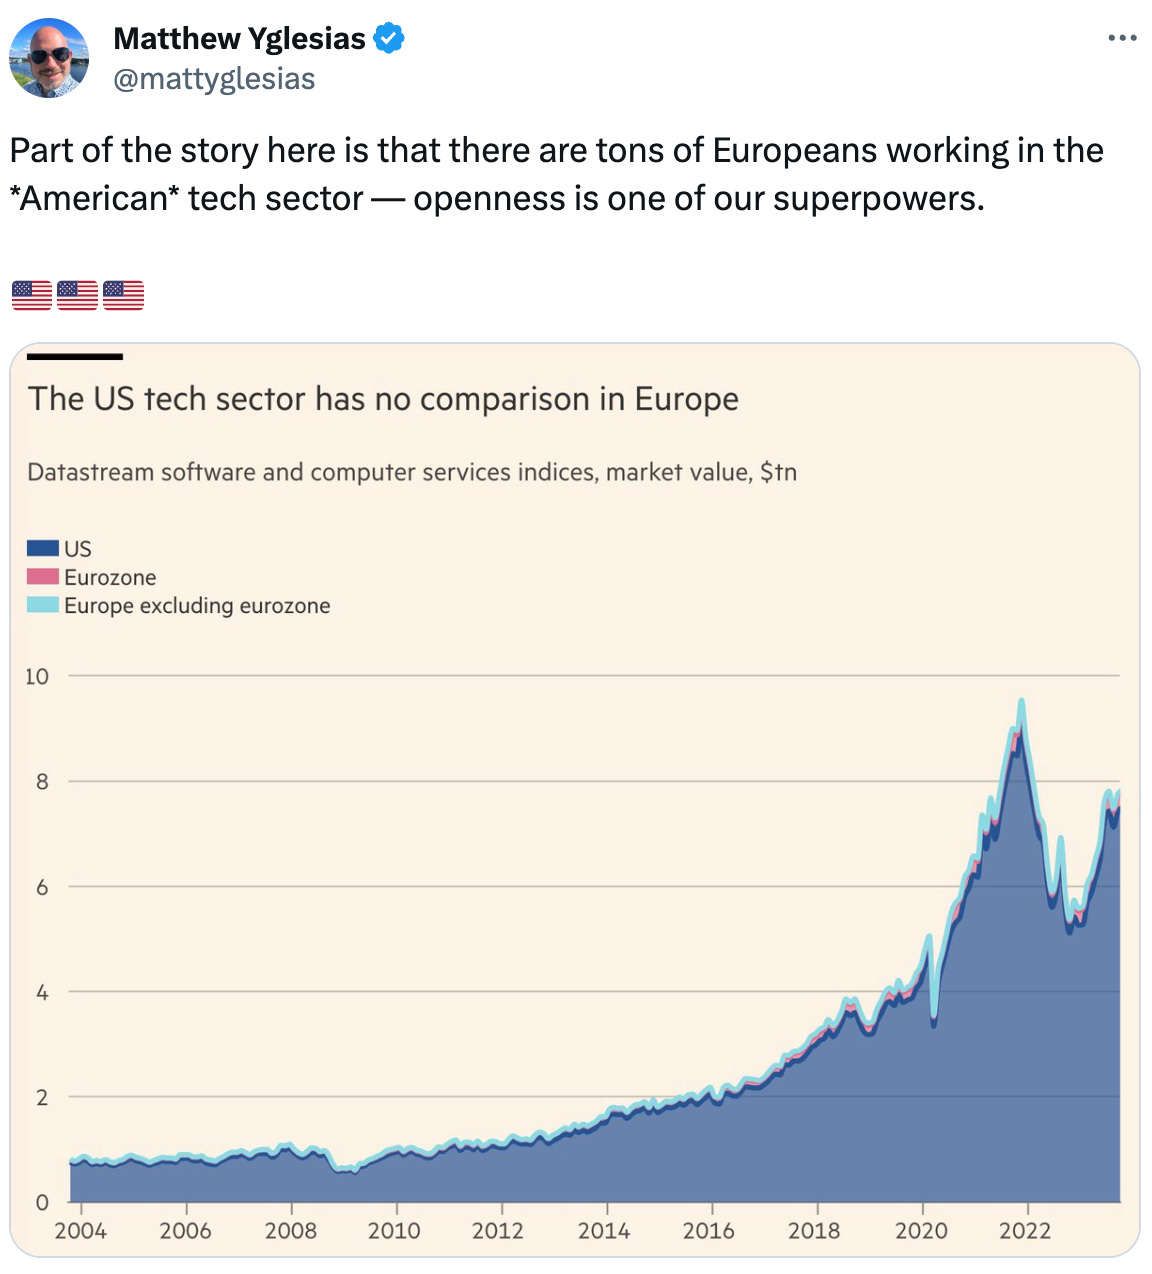  Matthew Yglesias @mattyglesias Part of the story here is that there are tons of Europeans working in the *American* tech sector — openness is one of our superpowers.  🇺🇸🇺🇸🇺🇸